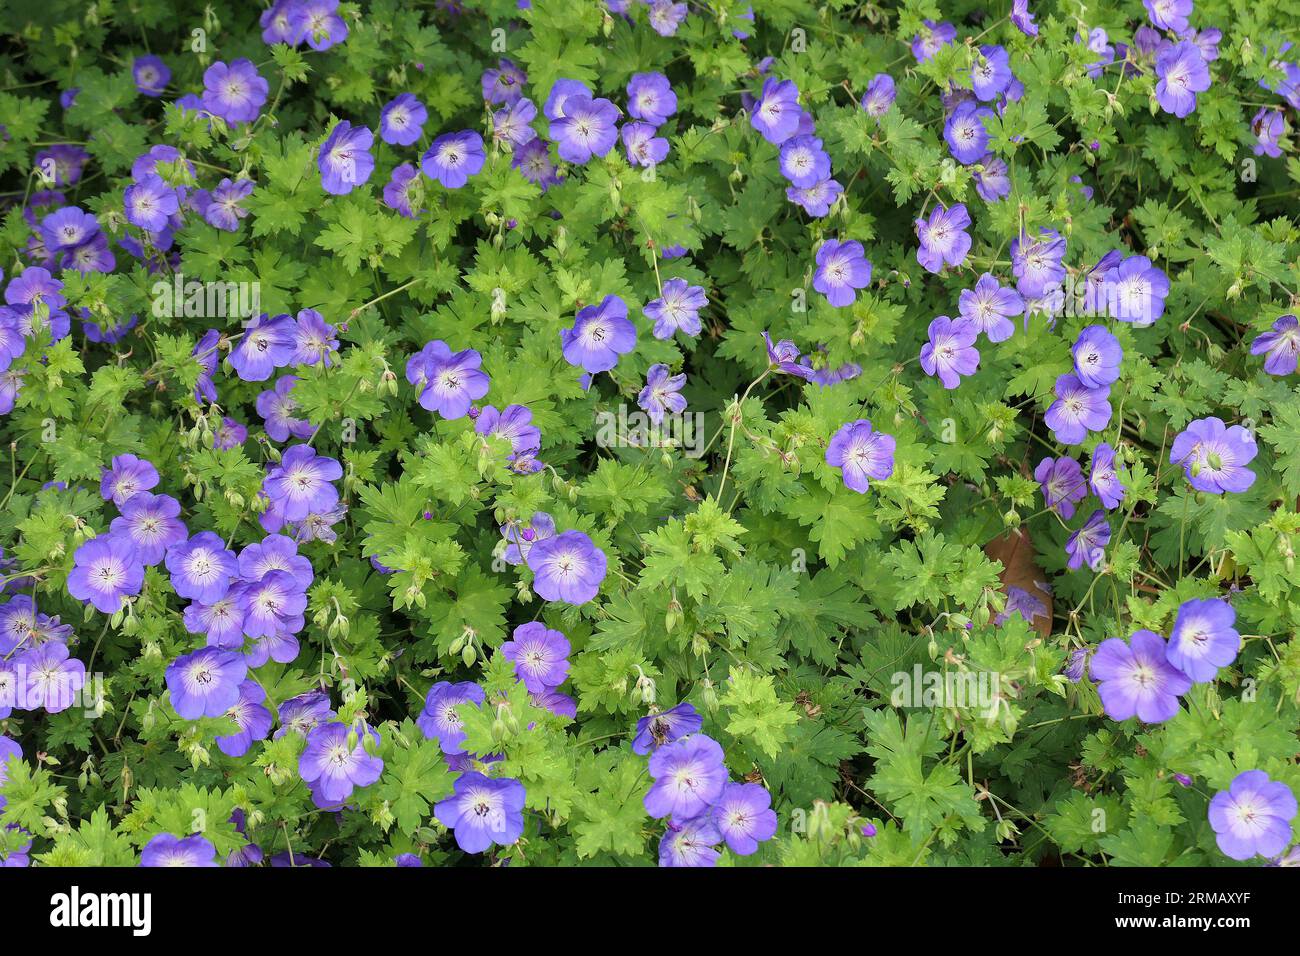 Closeup of the summer long blue flowers of the flowering herbaceous perennial garden plant geranium Rozanne or cranesbill. Stock Photo